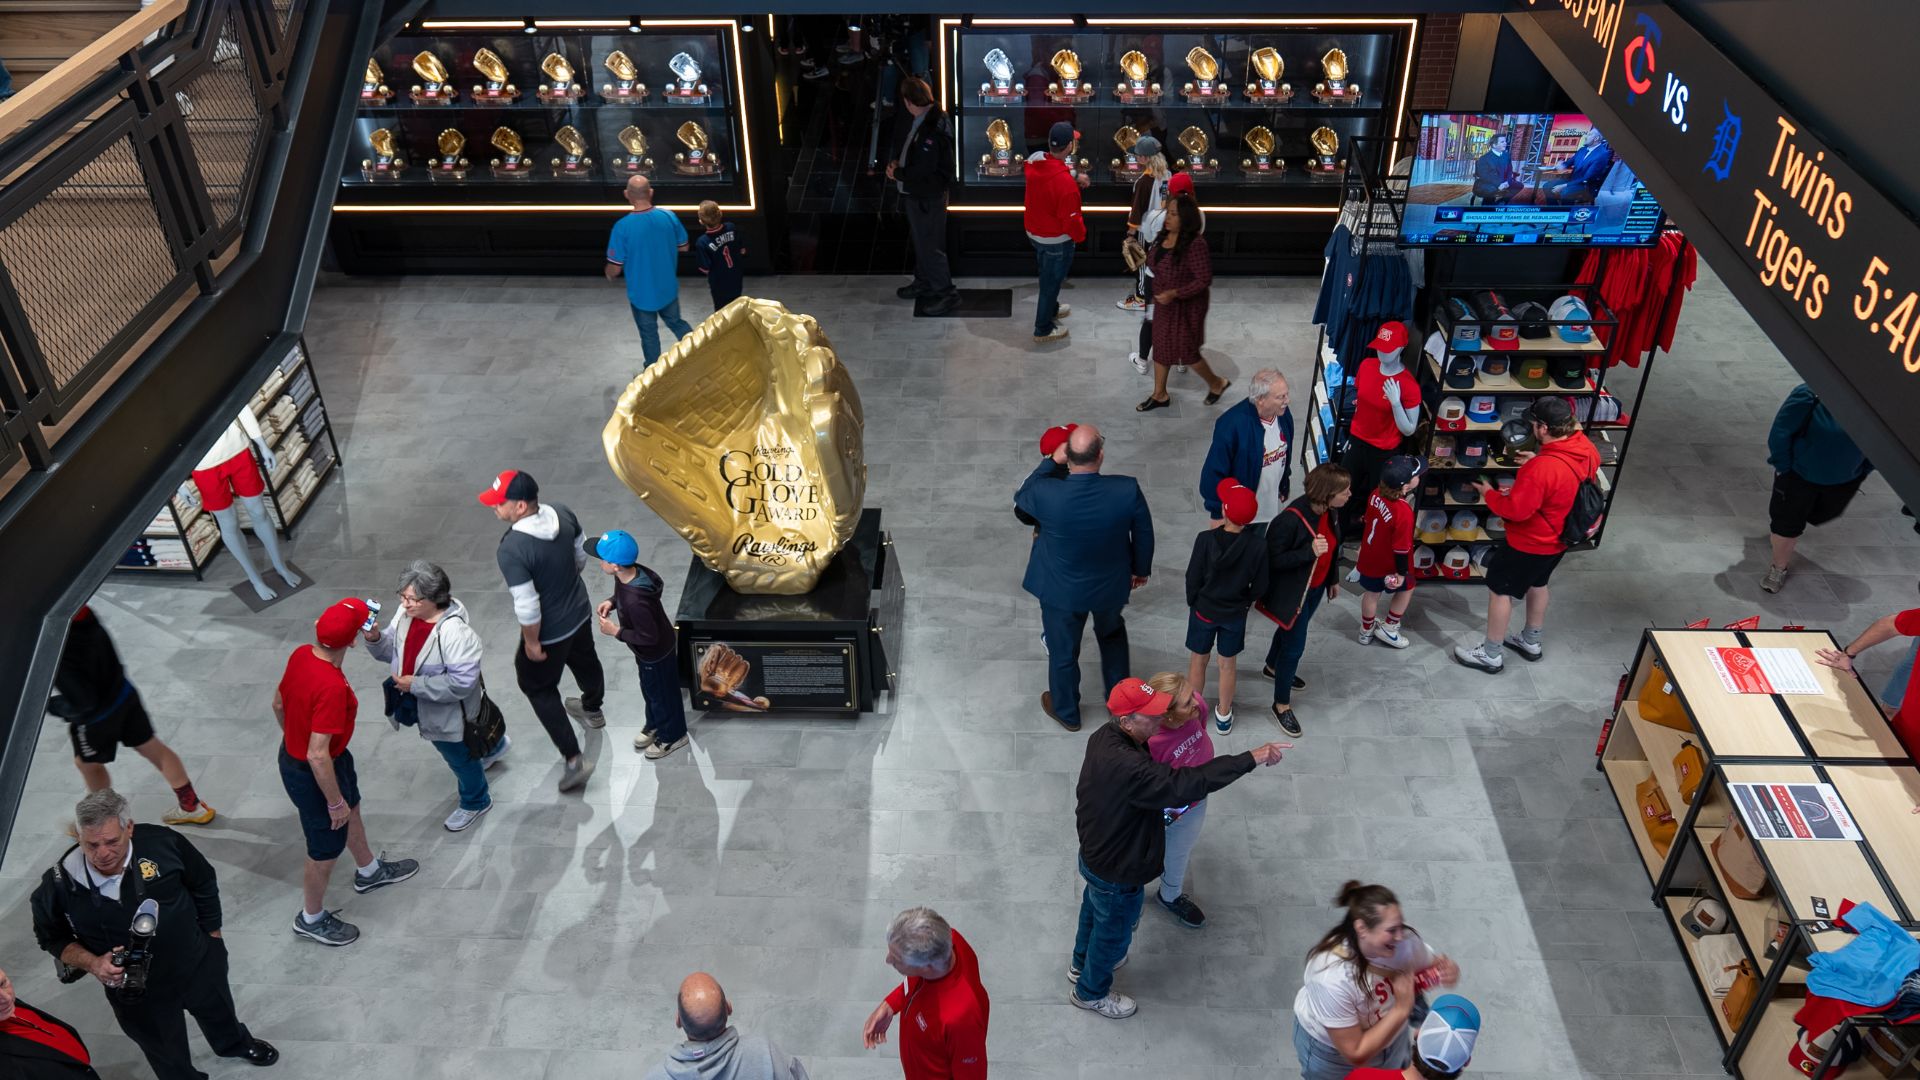 The Rawlings Experience has an immersive glove vault.